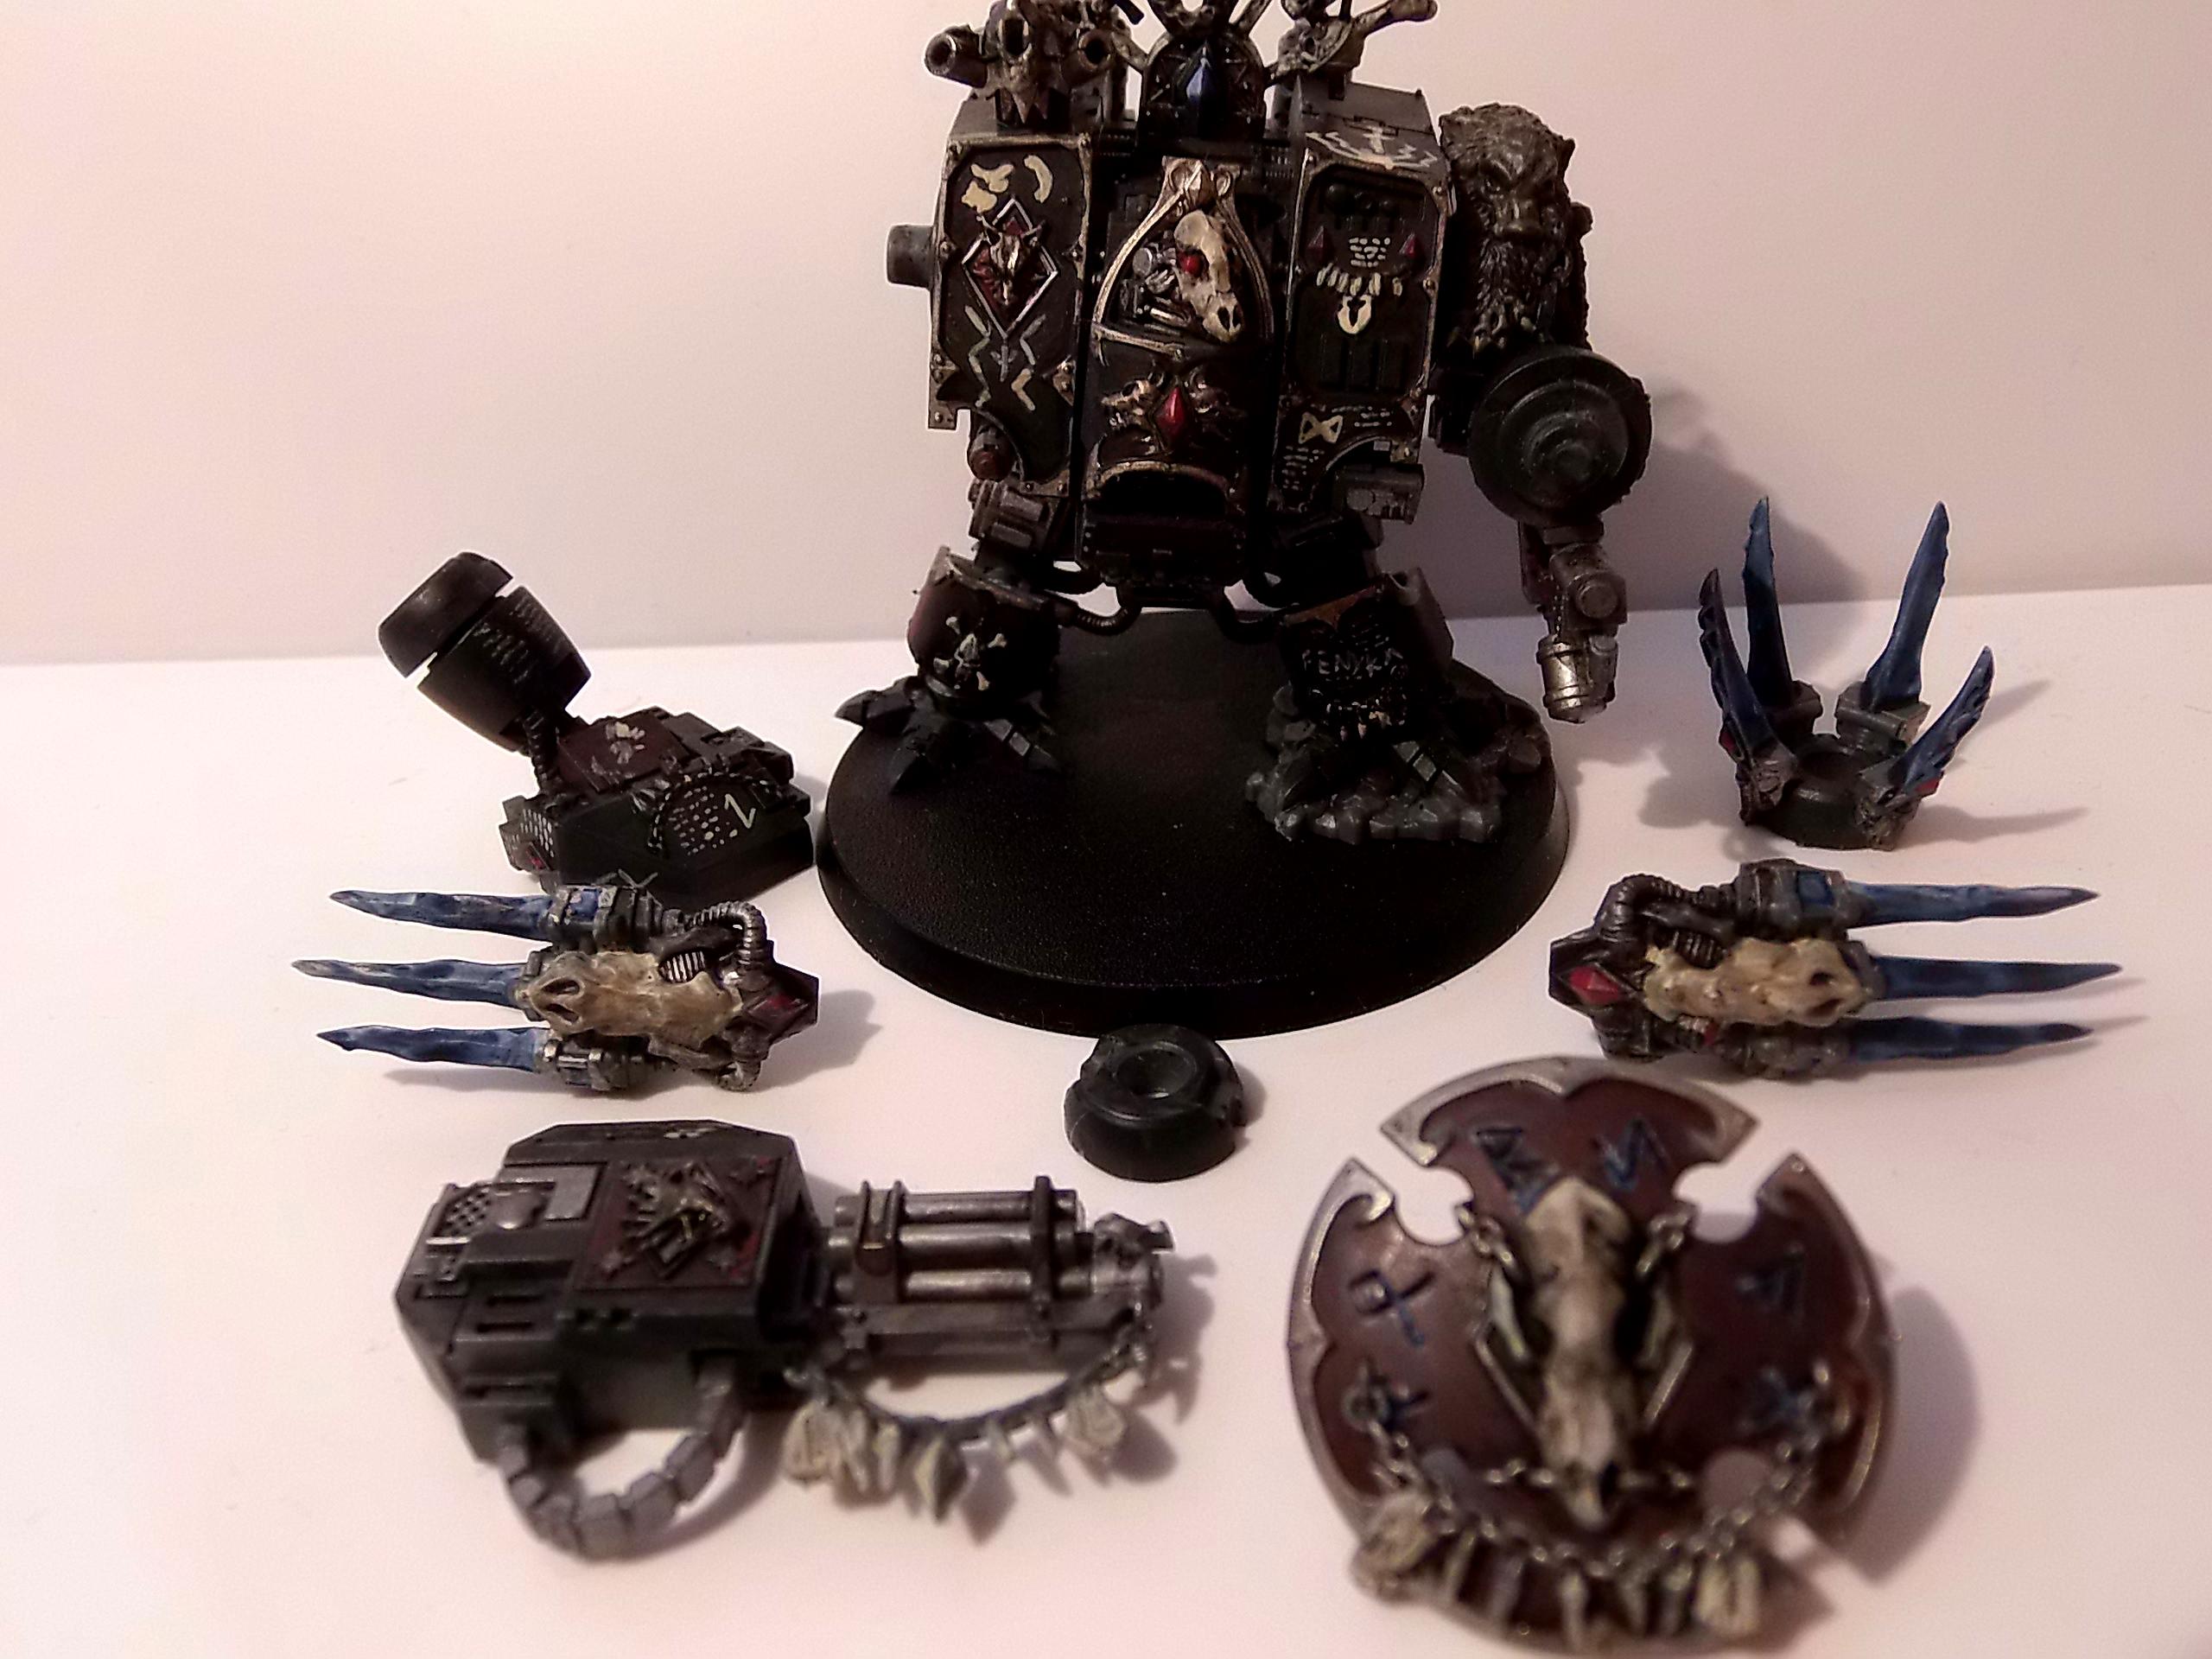 Bjorn The Fell Handed, Dreadnought, Murderfang, Space Marines, Space Wolves, Venerable